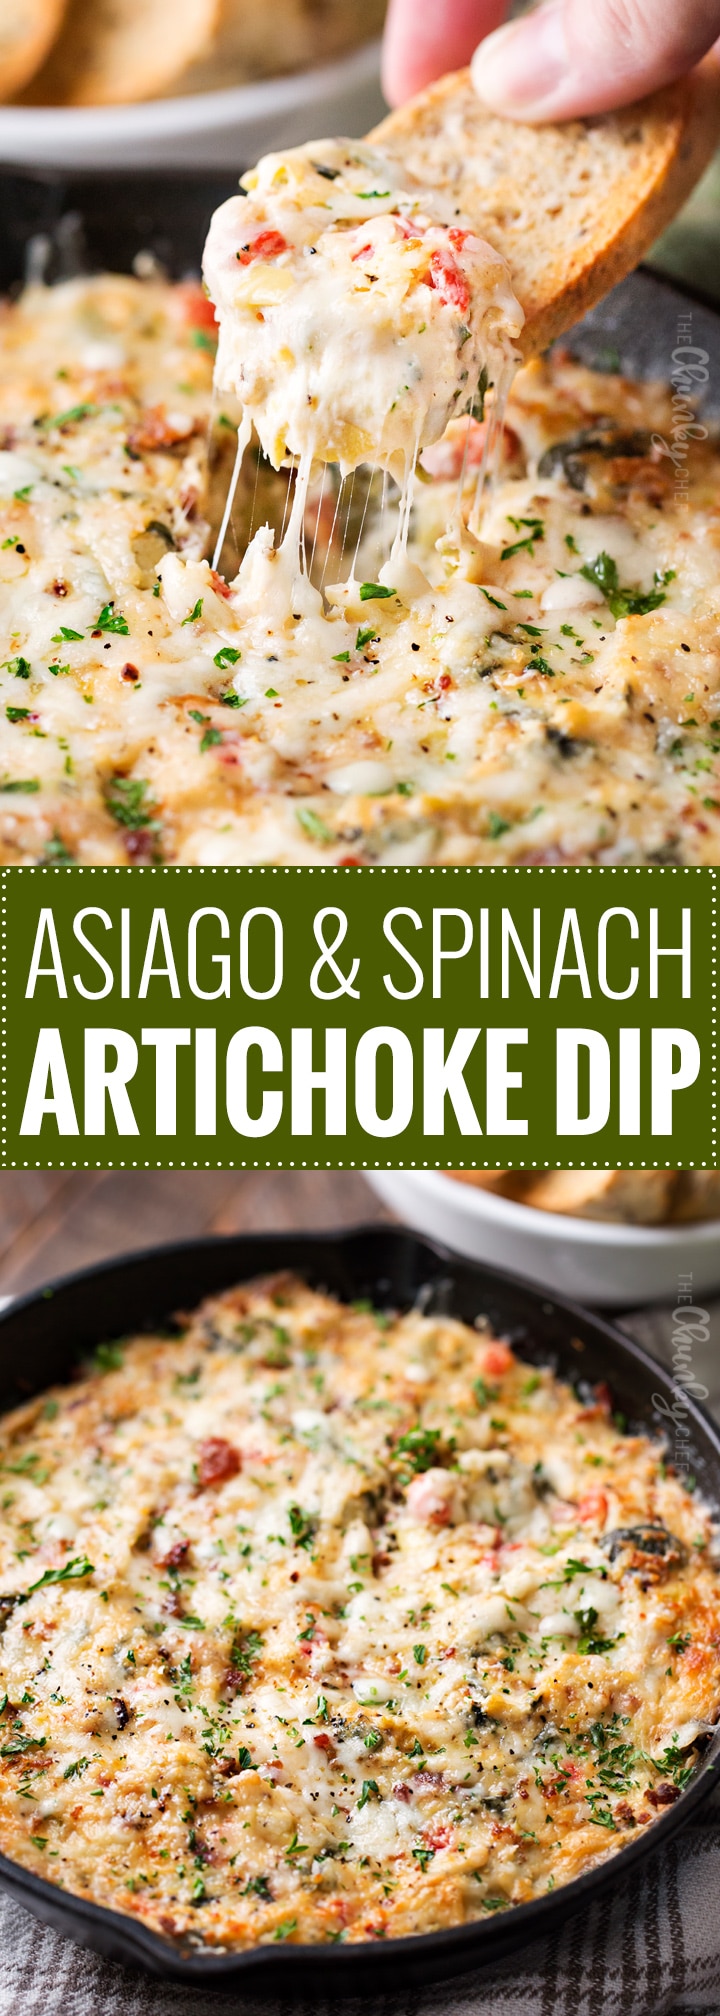 Asiago and Spinach Artichoke Dip | A classic party dish, this baked spinach and artichoke dip is made from scratch, using fresh ingredients, and still super easy to throw together! | https://www.thechunkychef.com | #partydip #hotdip #spinach #gameday #artichokedip